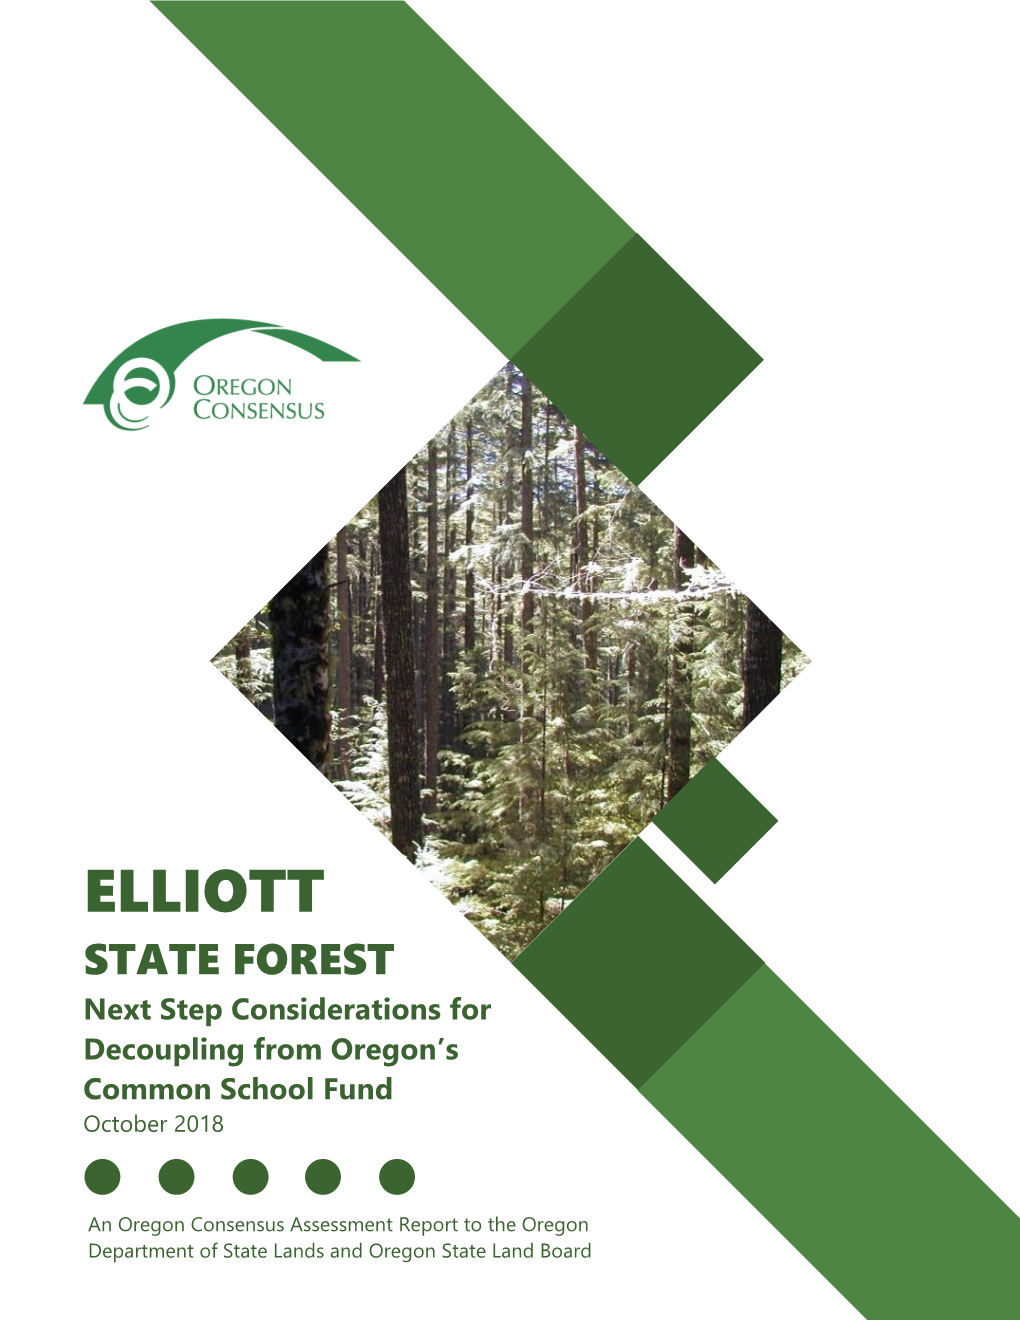 Elliott State Forest: Next Step Considerations for Decoupling From